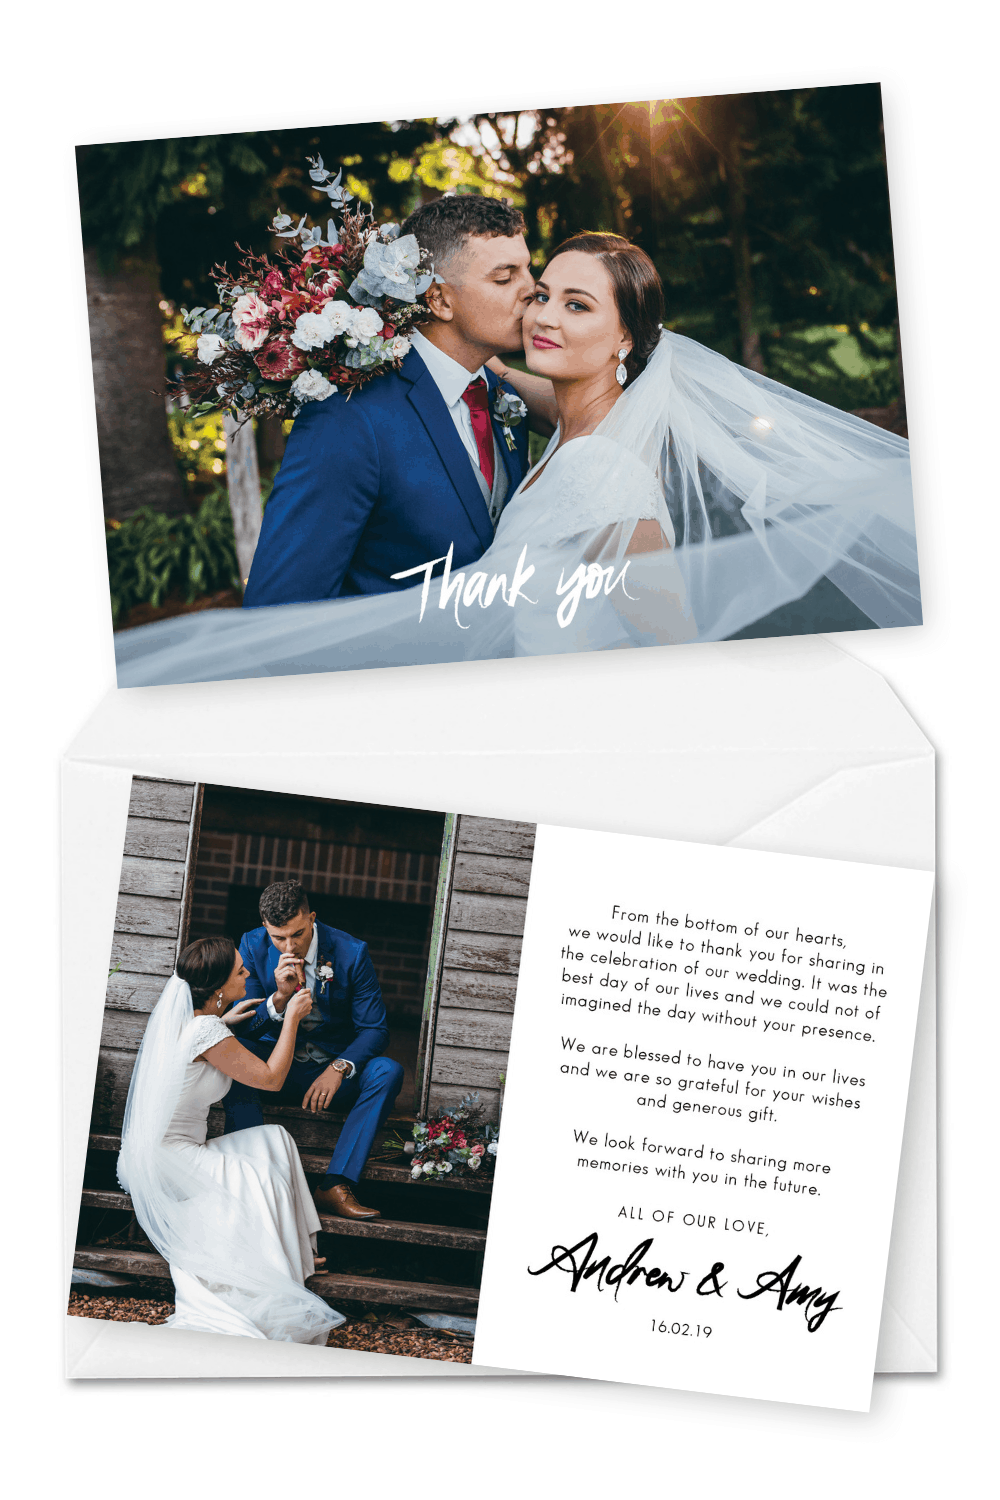 WEDDING-THANK YOU CARD-"A SPECIAL THANK YOU TO OUR BEST MAN ON OUR WEDDING DAY" 